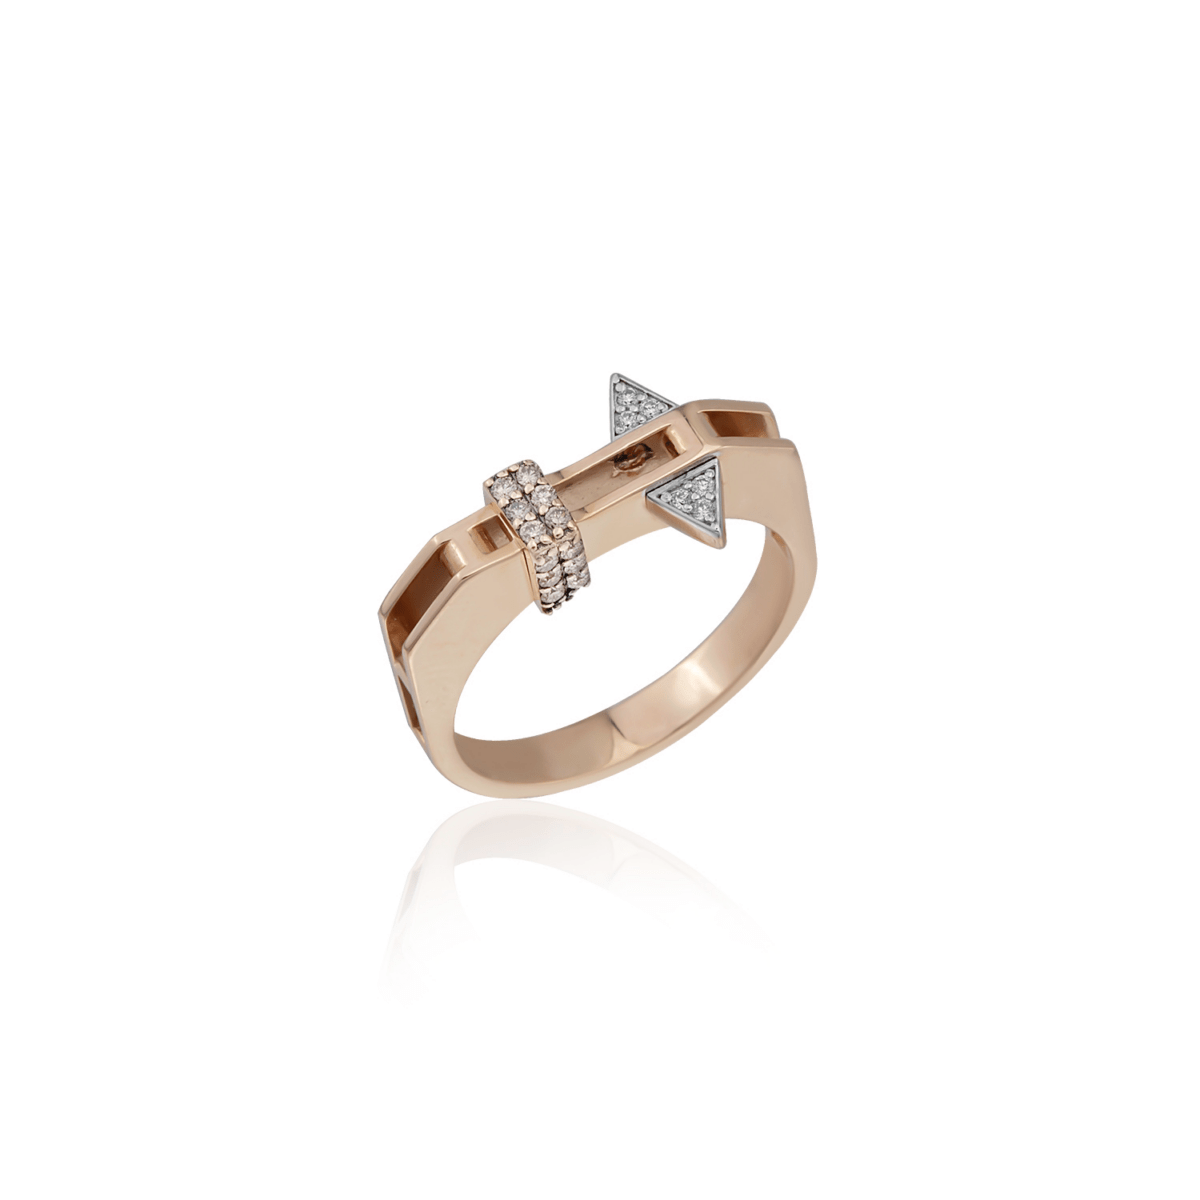 Marla Ring (Small Size)